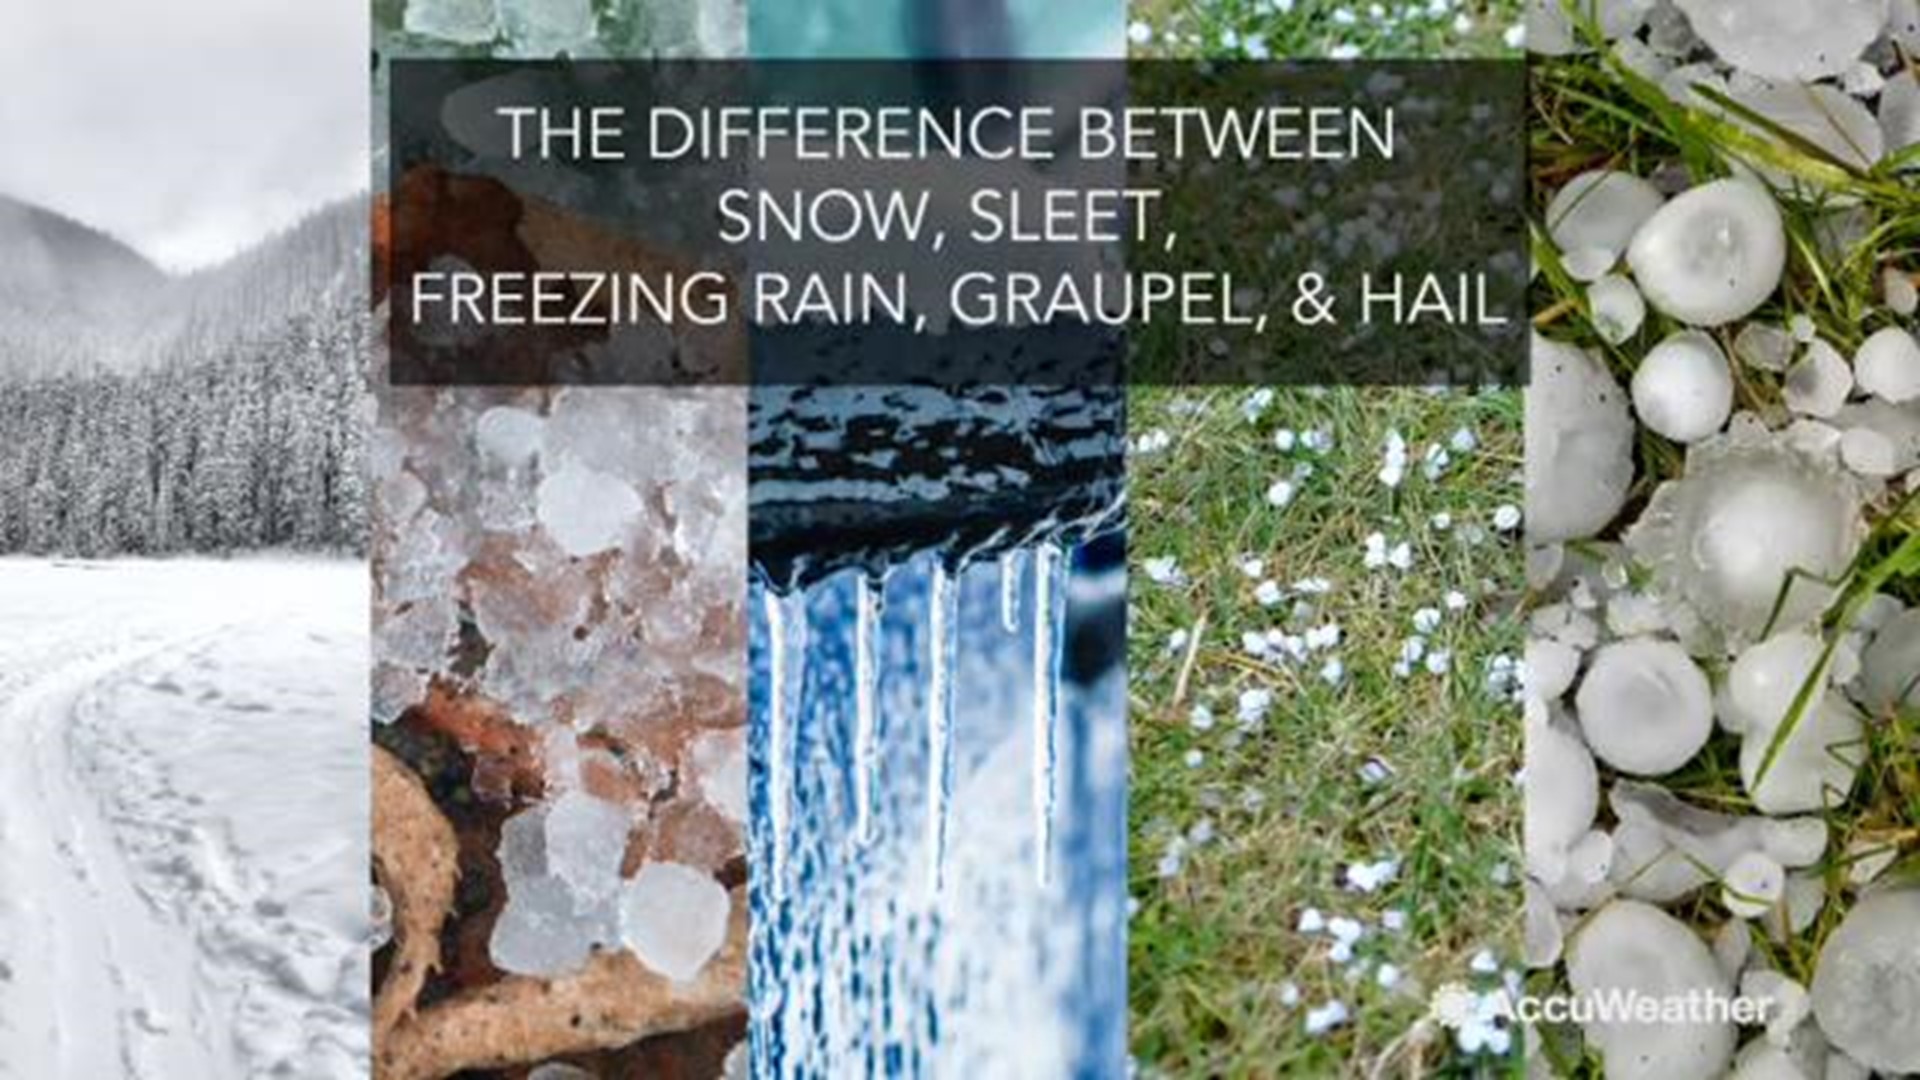 Snow, sleet, freezing rain, graupel and hail are all types of precipitation. So what is the difference between them?